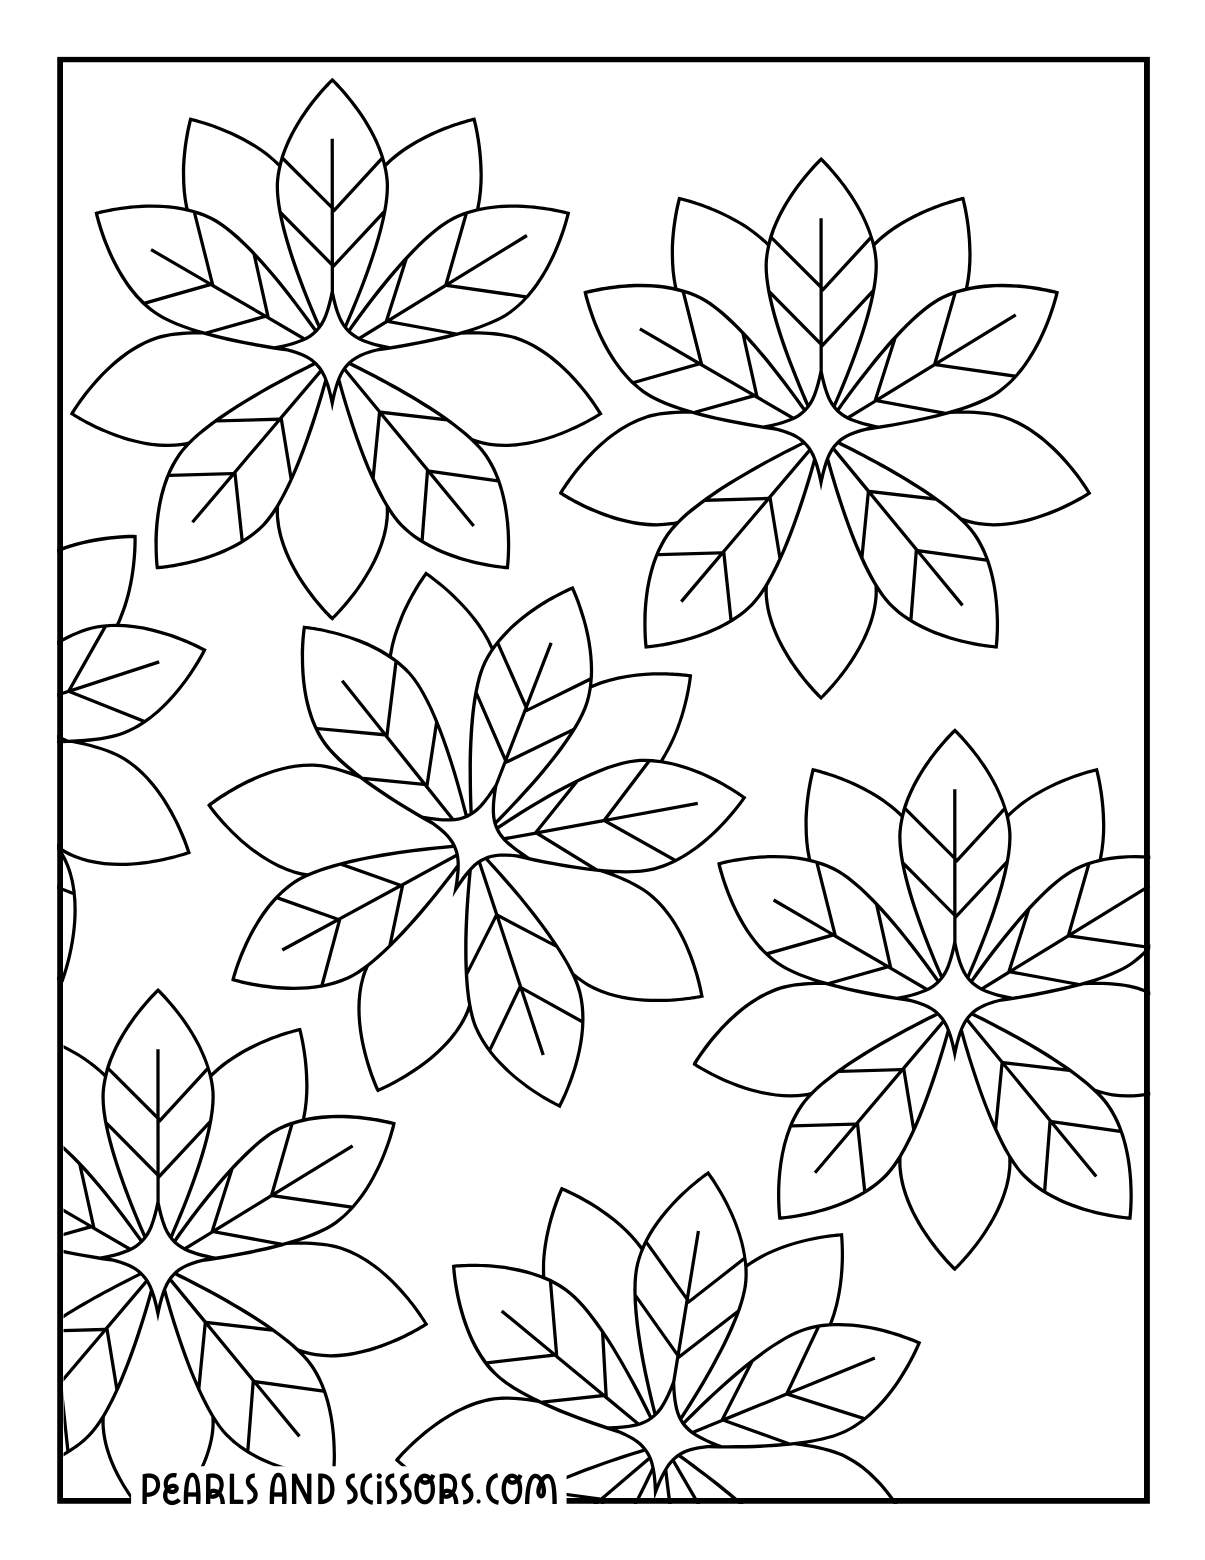 Poinsettia flowers outline to color.